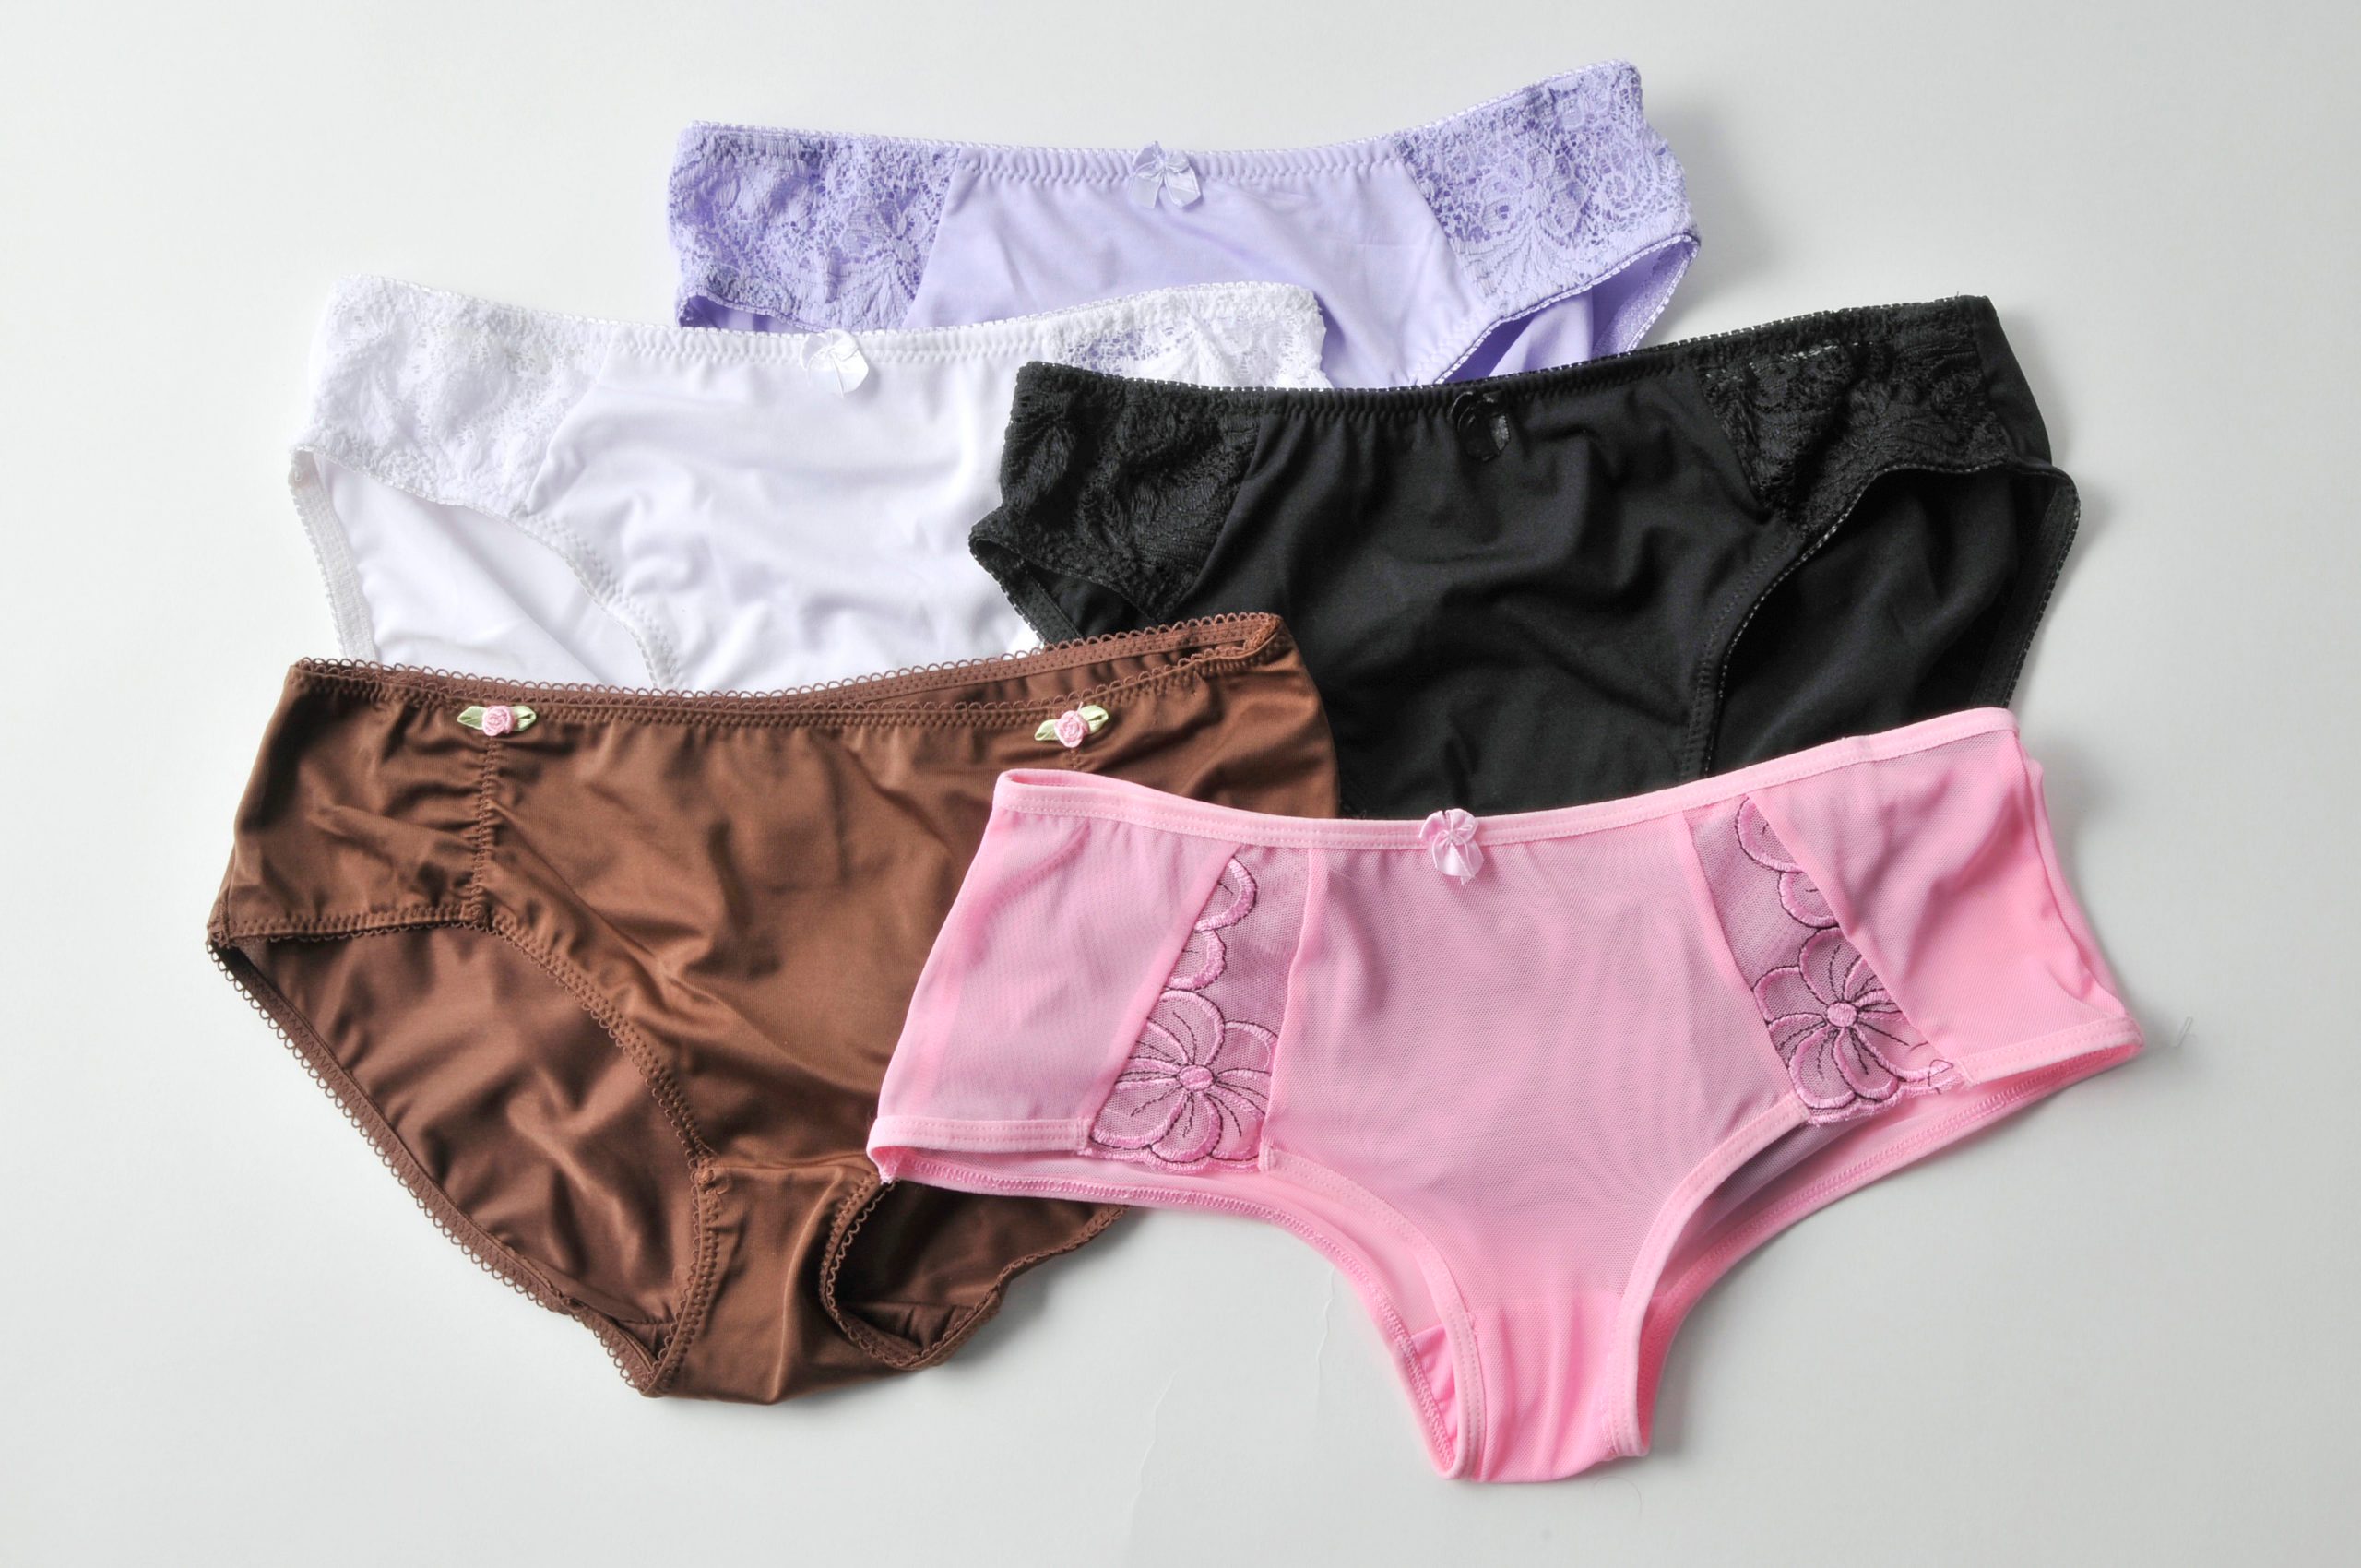 Why your gyneocologist will always recommend natural fibre underwear?